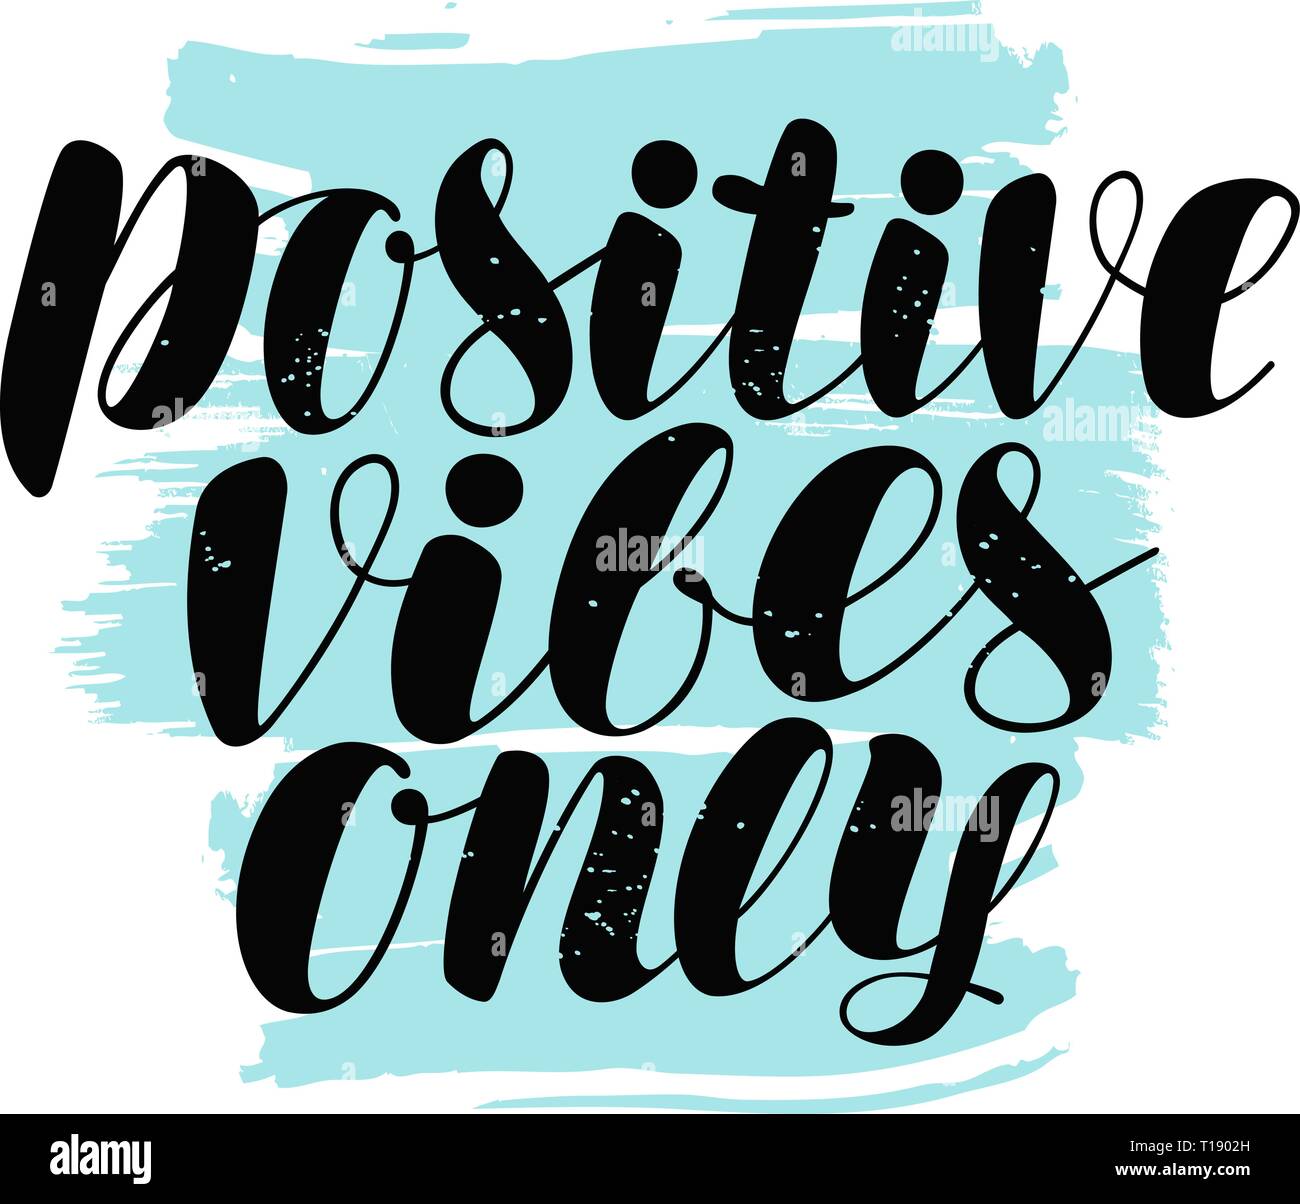 Positive vibes only hi-res stock photography and images - Alamy